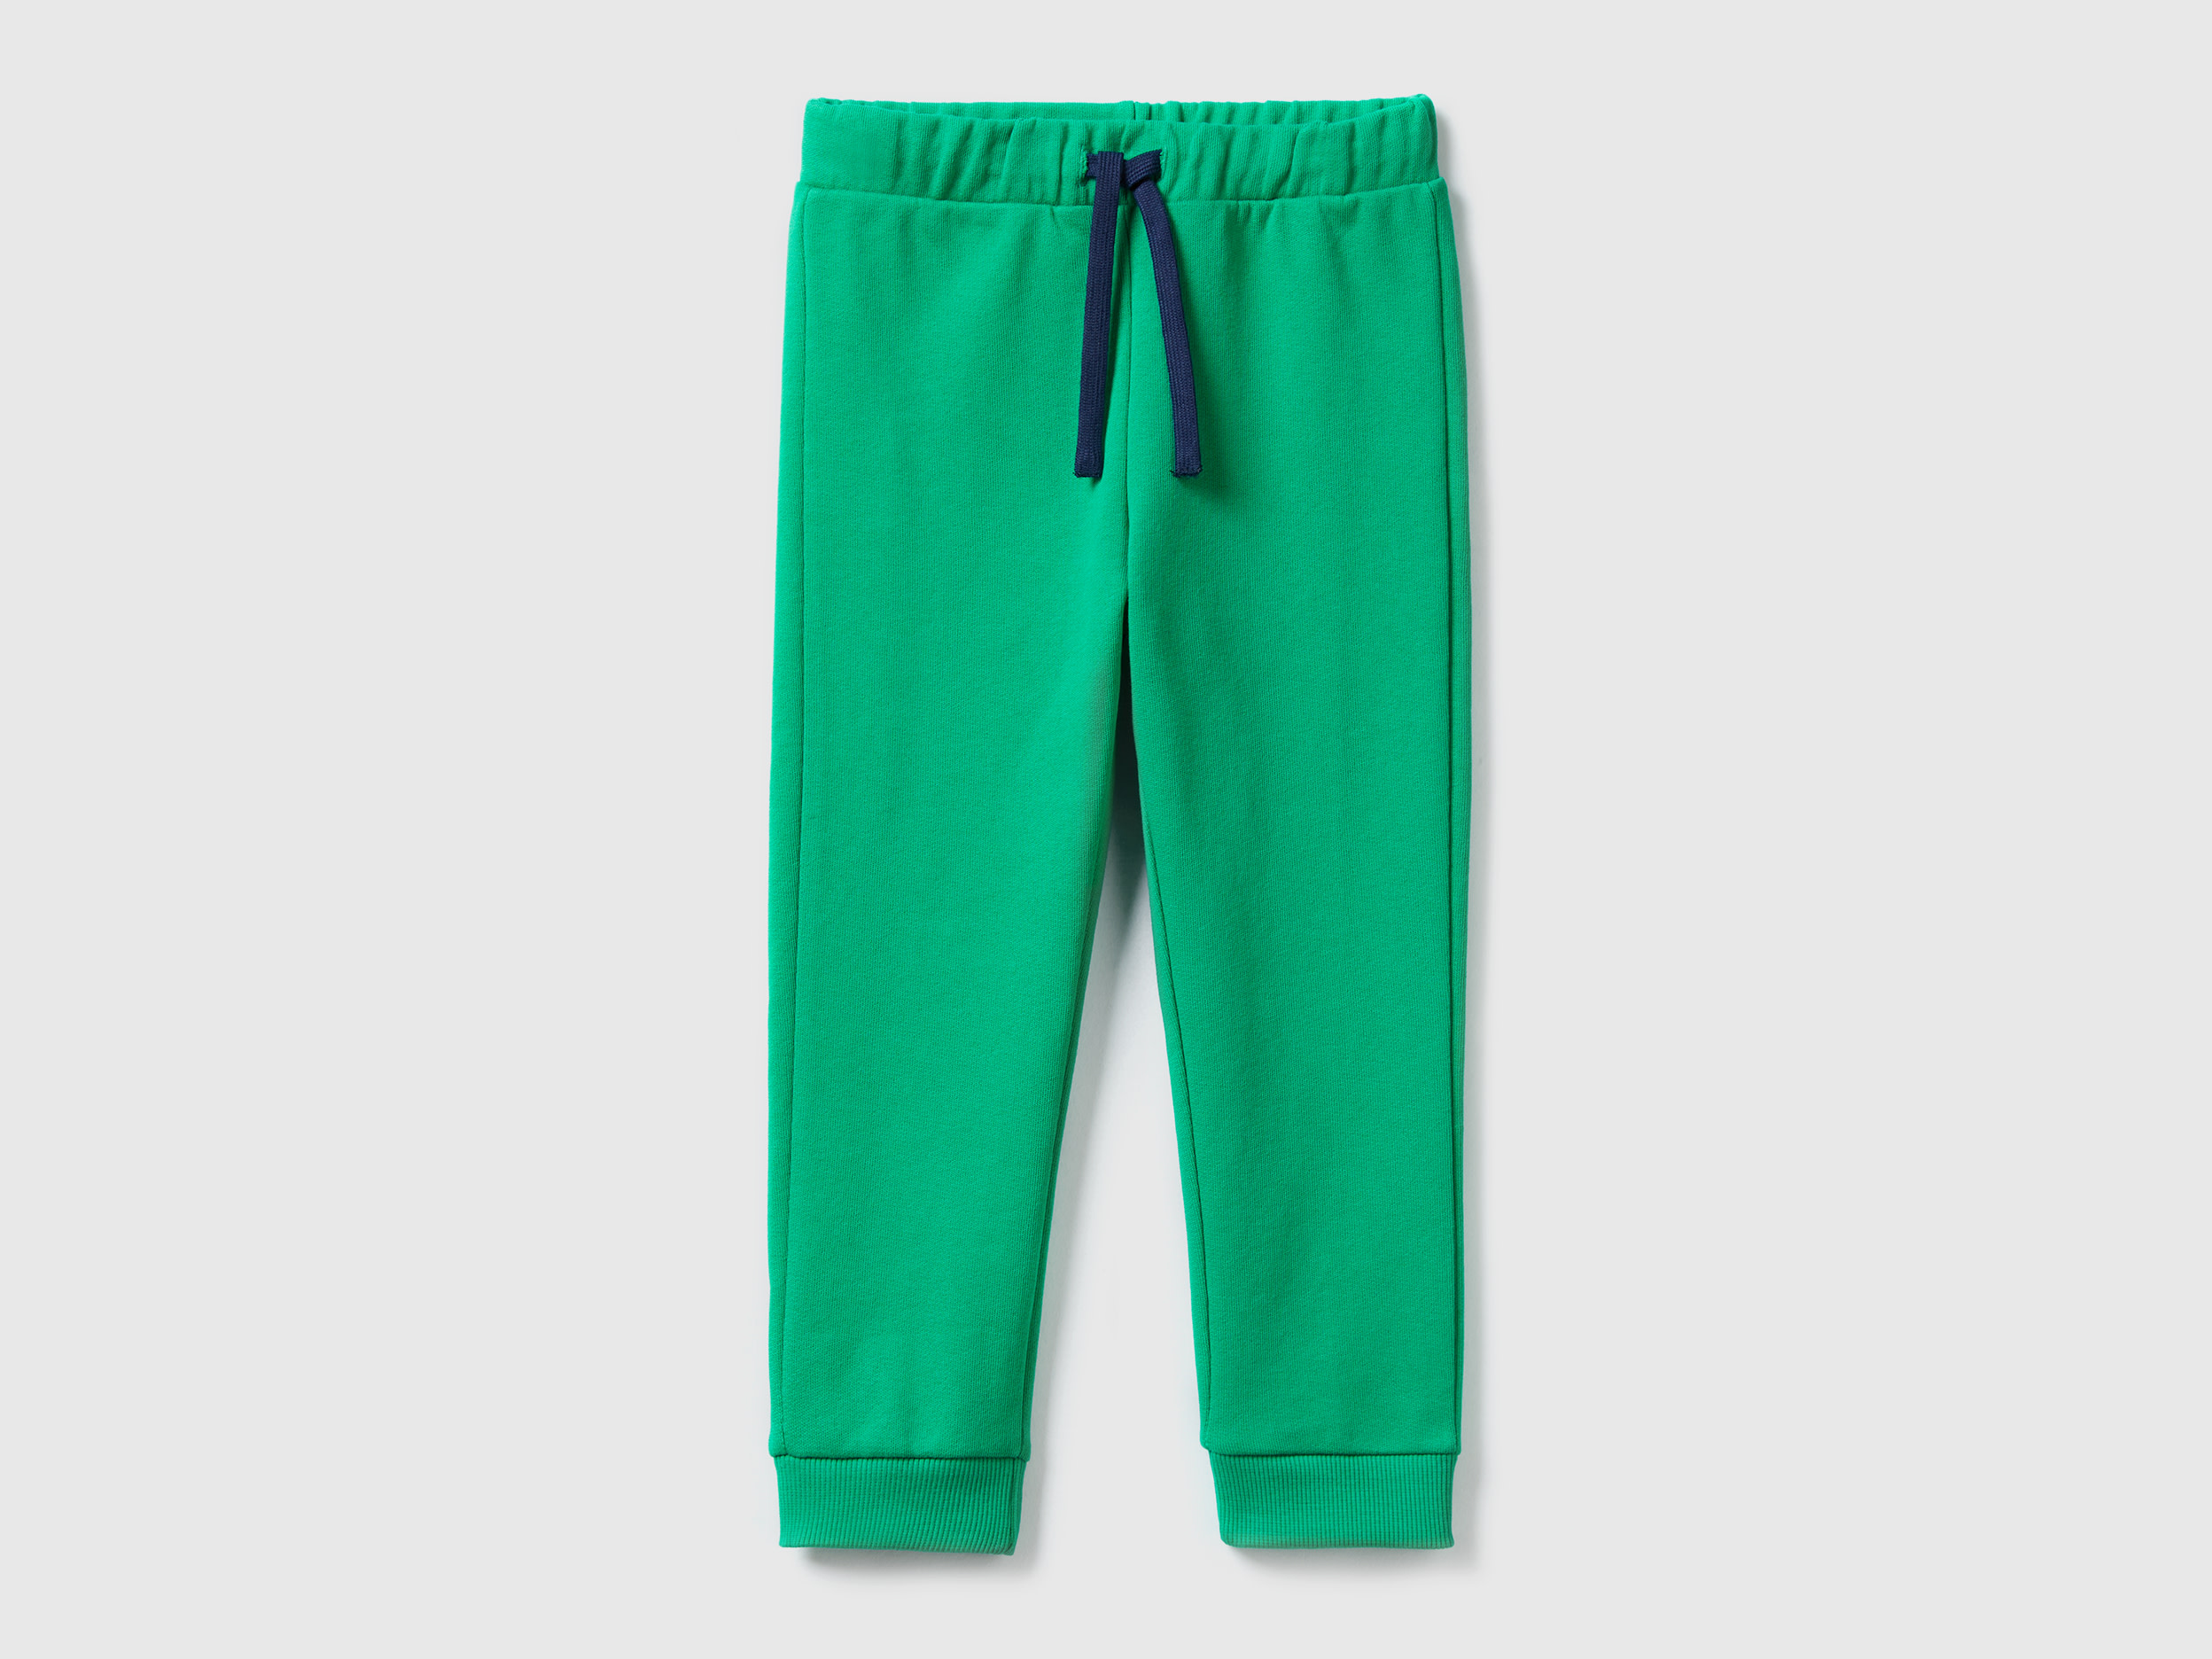 Image of Benetton, Sweatpants With Pocket, size 82, Green, Kids